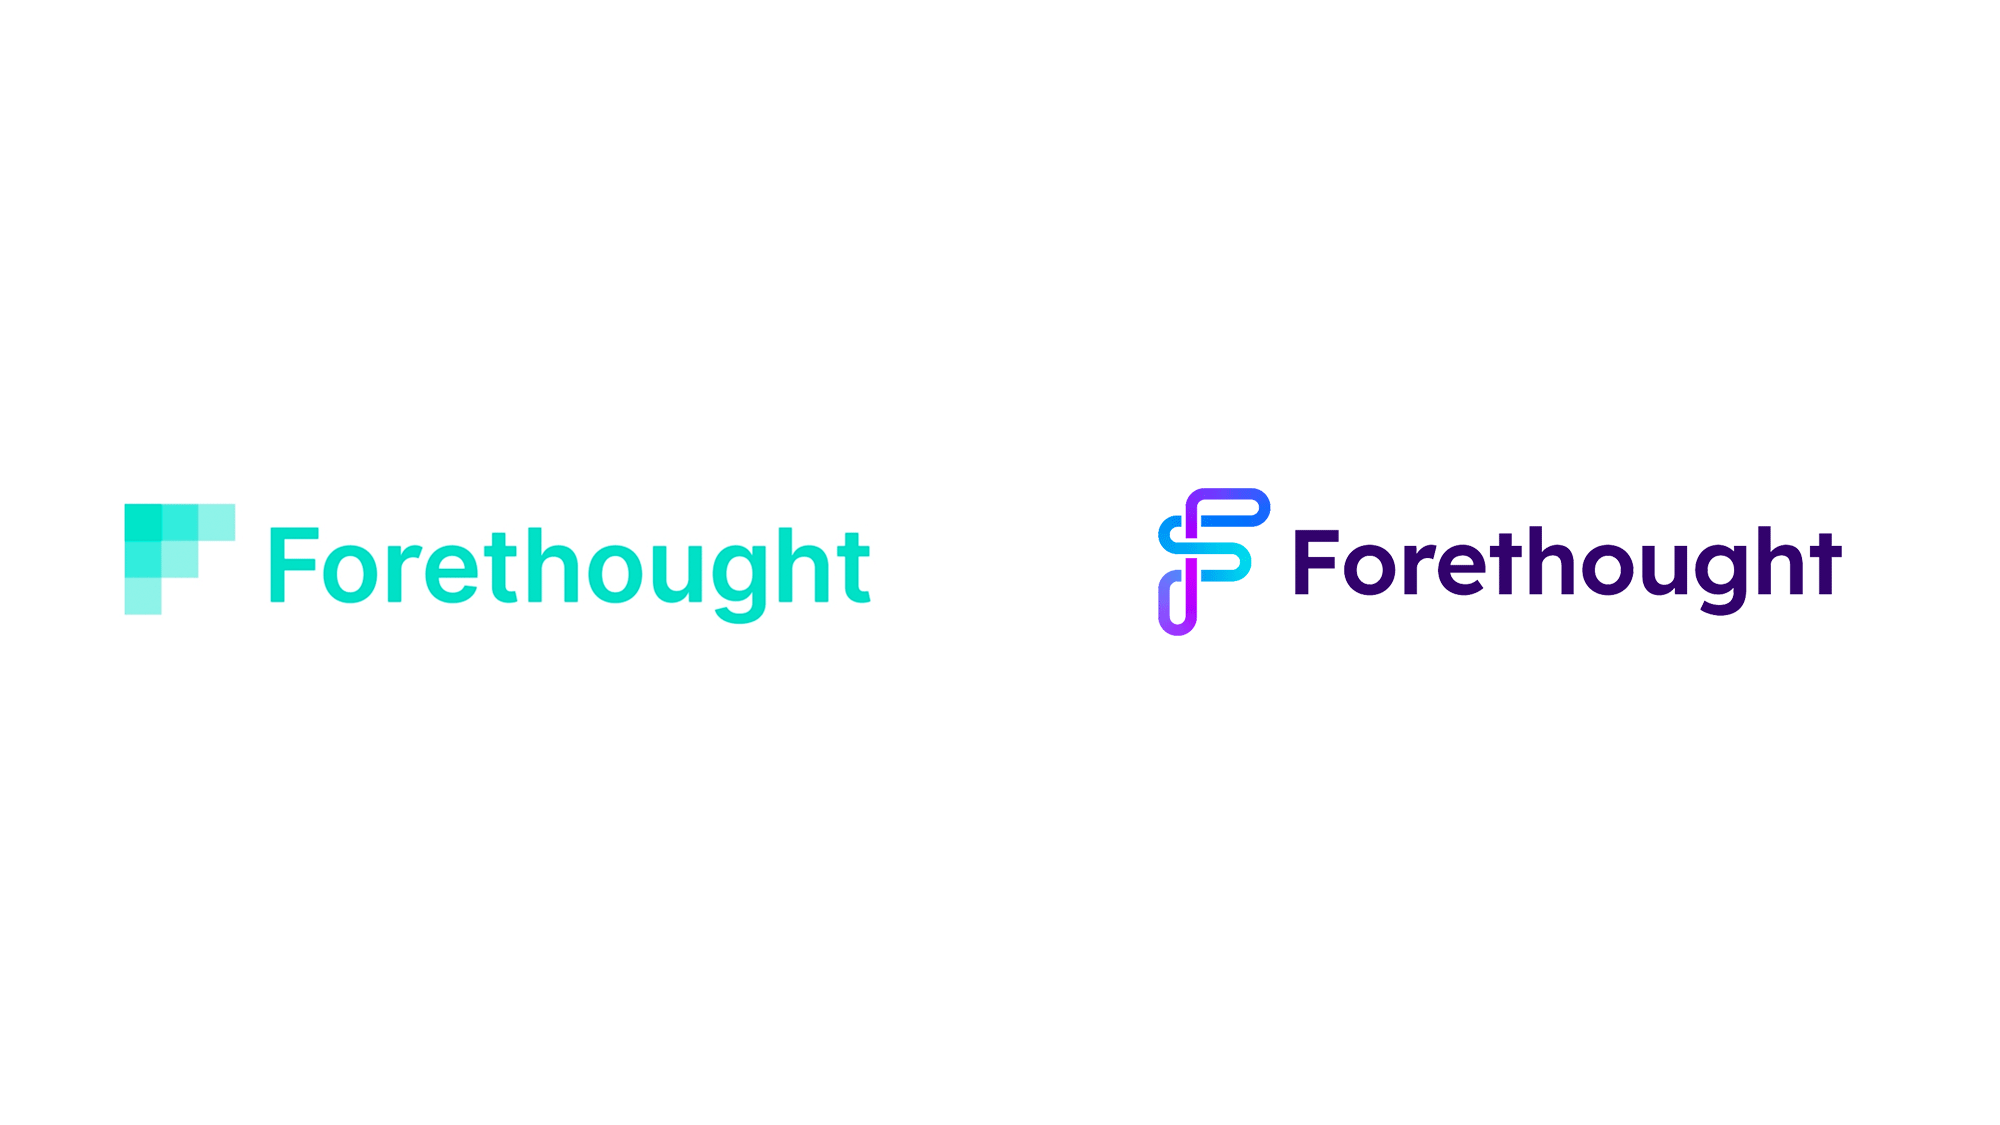 a presentation program created by forethought inc